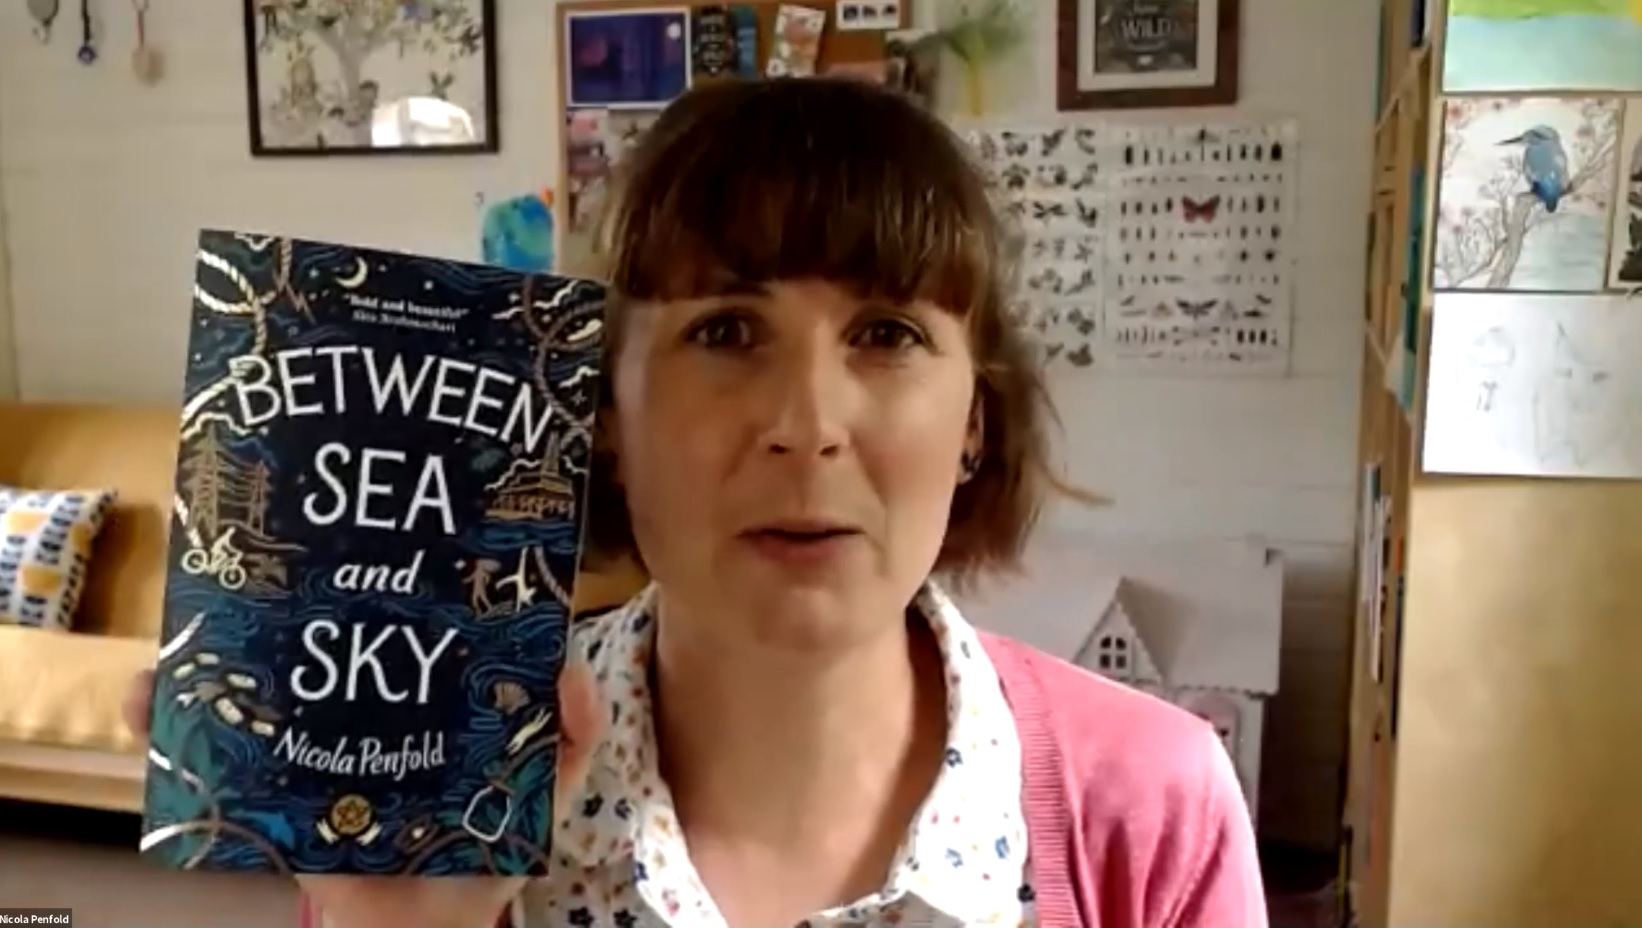 ReadingZone Bookclub:  Nicola Penfold introduces Between Sea and Sky